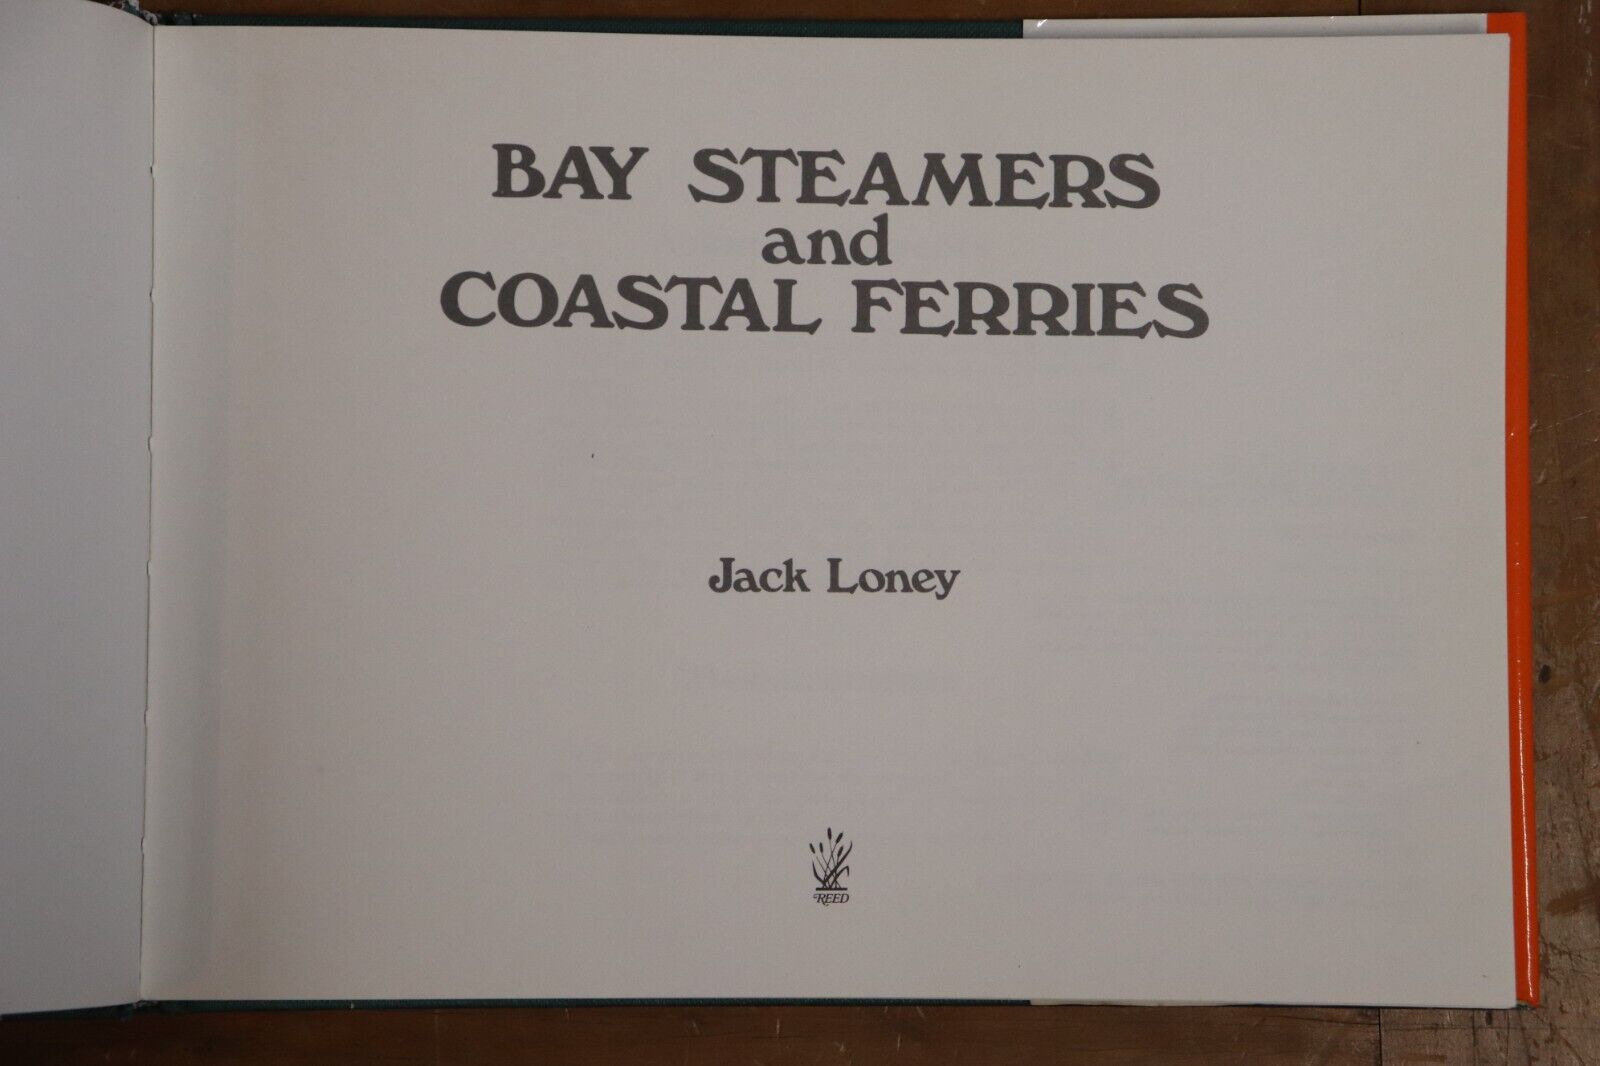 Bay Steamers and Coastal Ferries - 1982 - Melbourne, Australia History Book